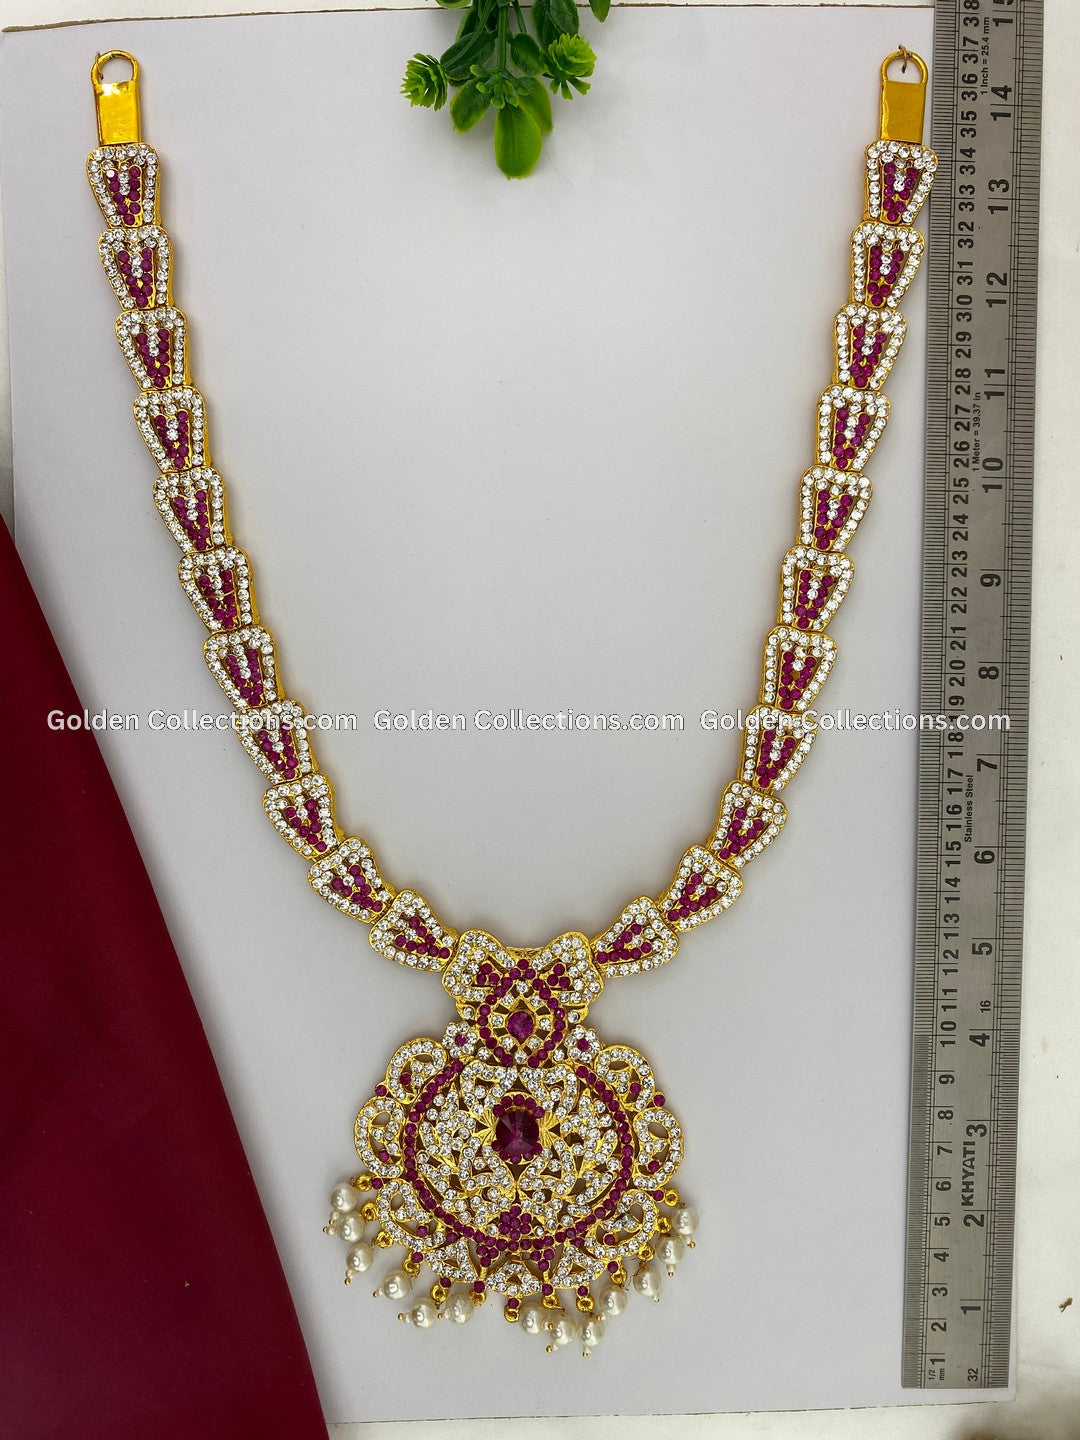 Shop Now Ornate Deity Long Necklace - GoldenCollections 2